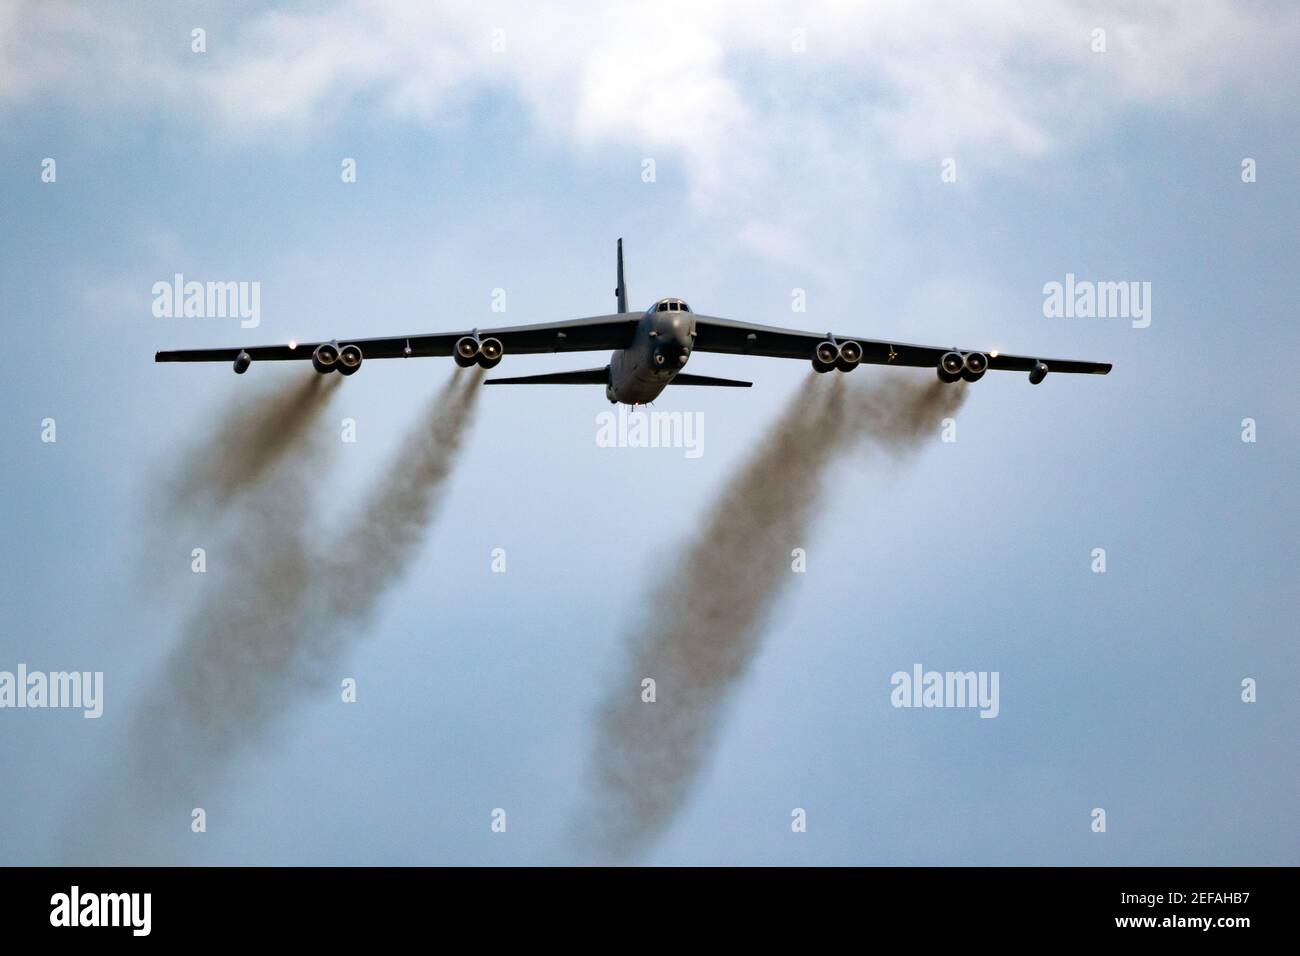 US Air Force Boeing B-52 Stratofortress bomber aircraft performing a low-pass at the Sanice Sunset Airshow. Belgium - September 13, 2019 Stock Photo